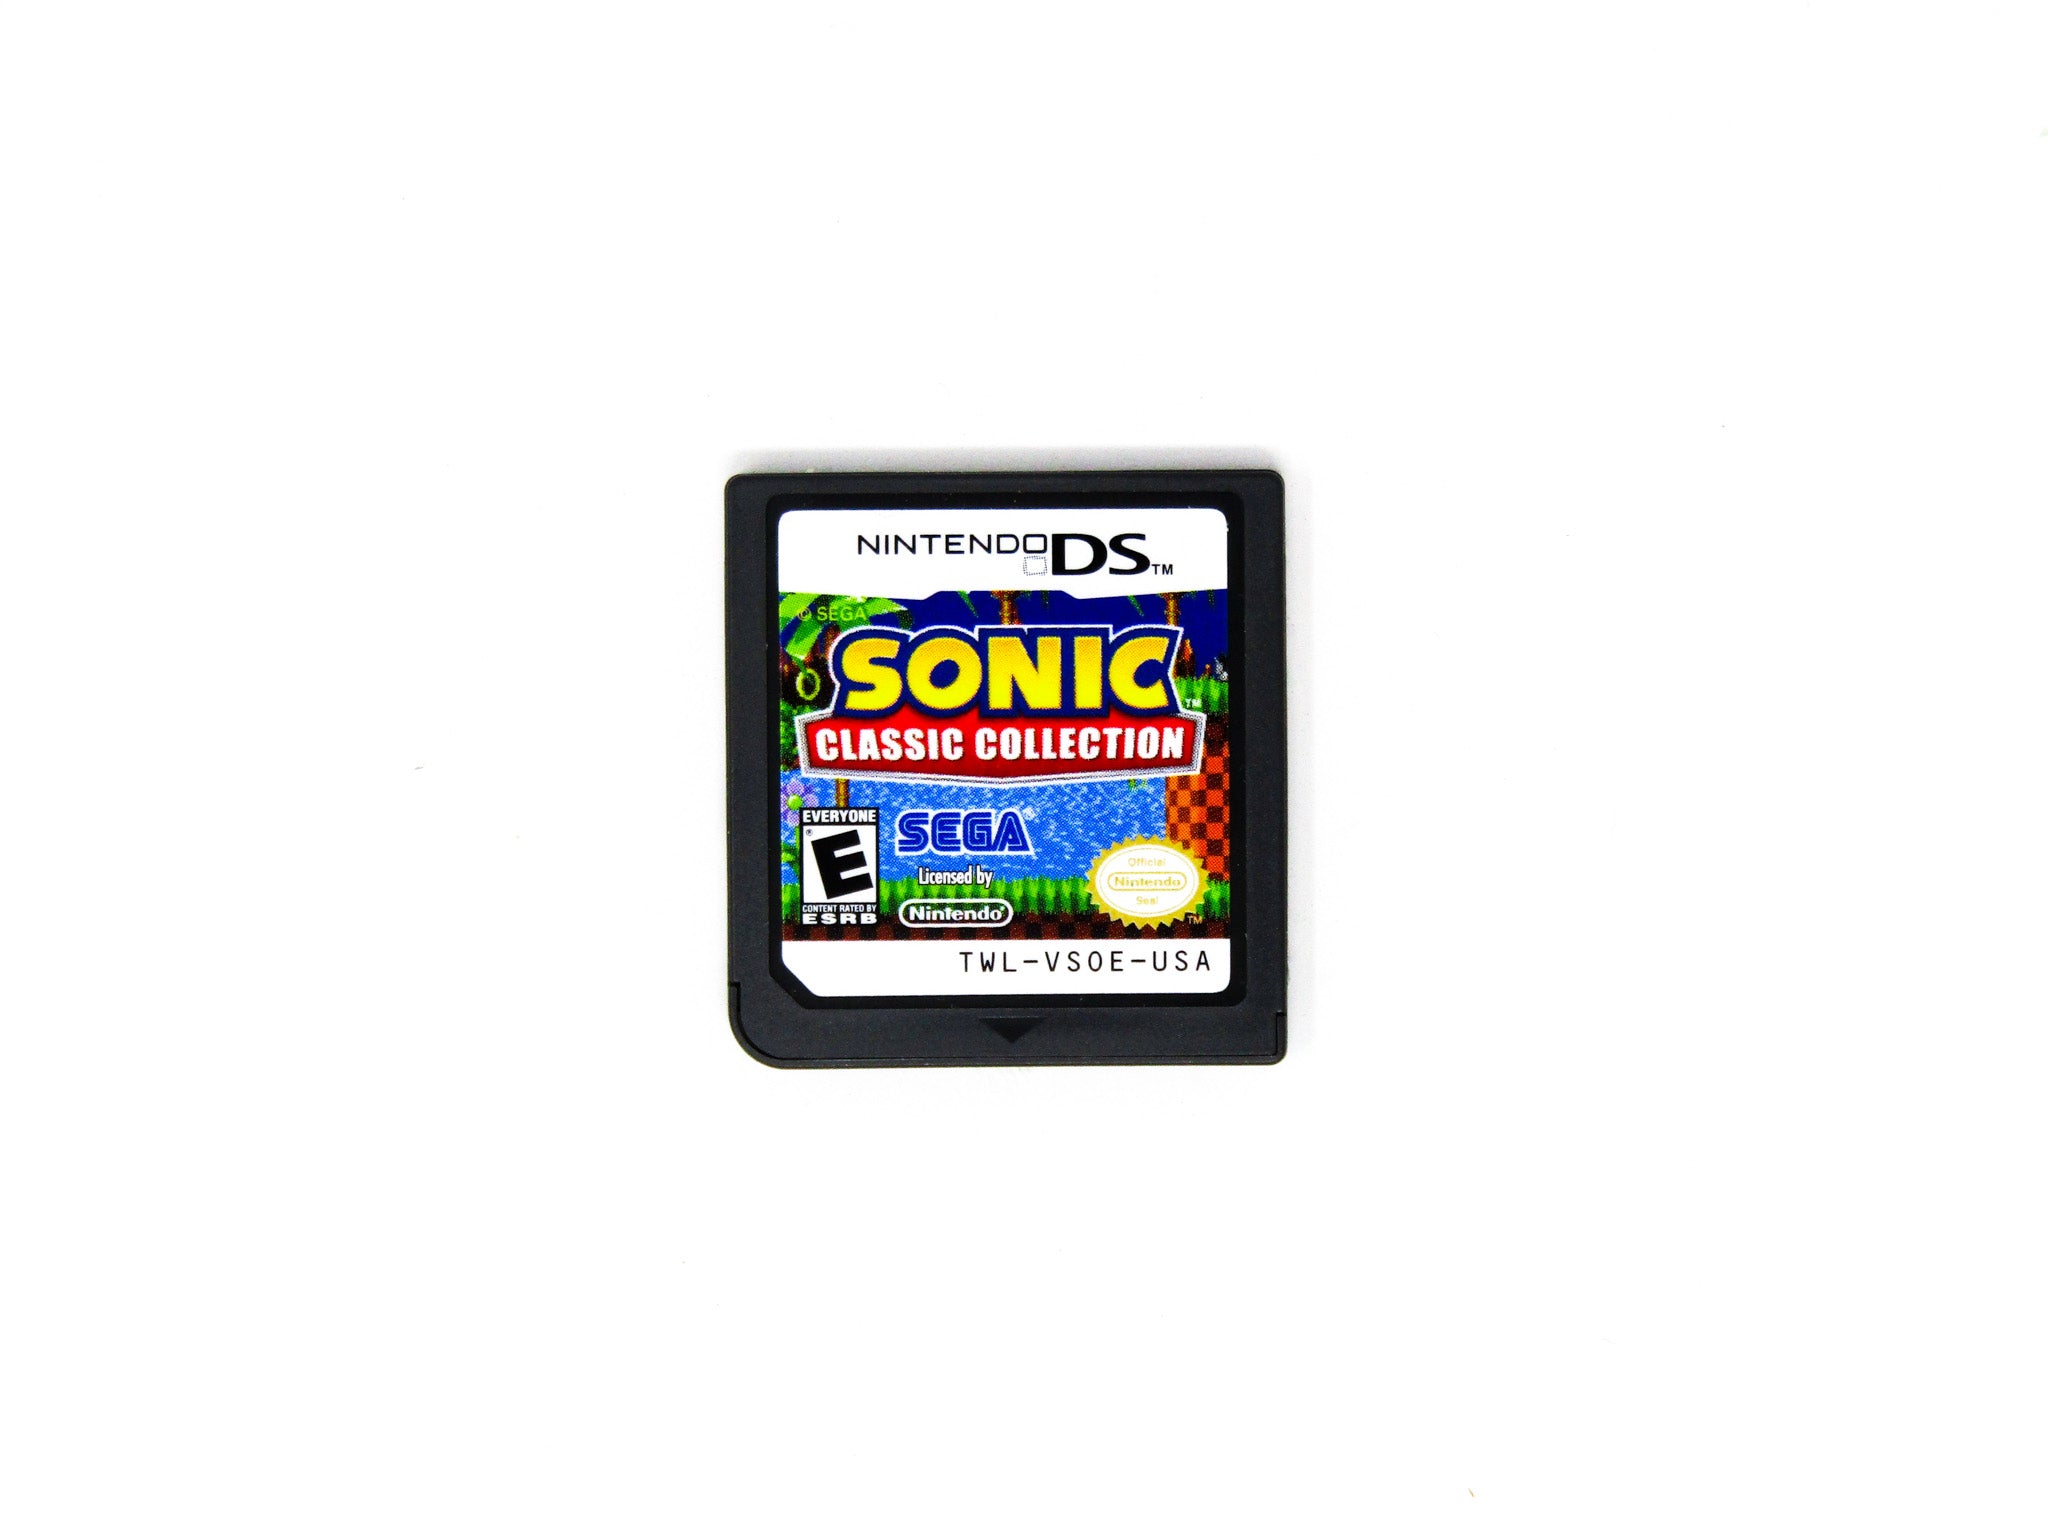 Sonic Classic Collection Nintendo DS 3DS w/ Genuine Case MISSING MANUAL